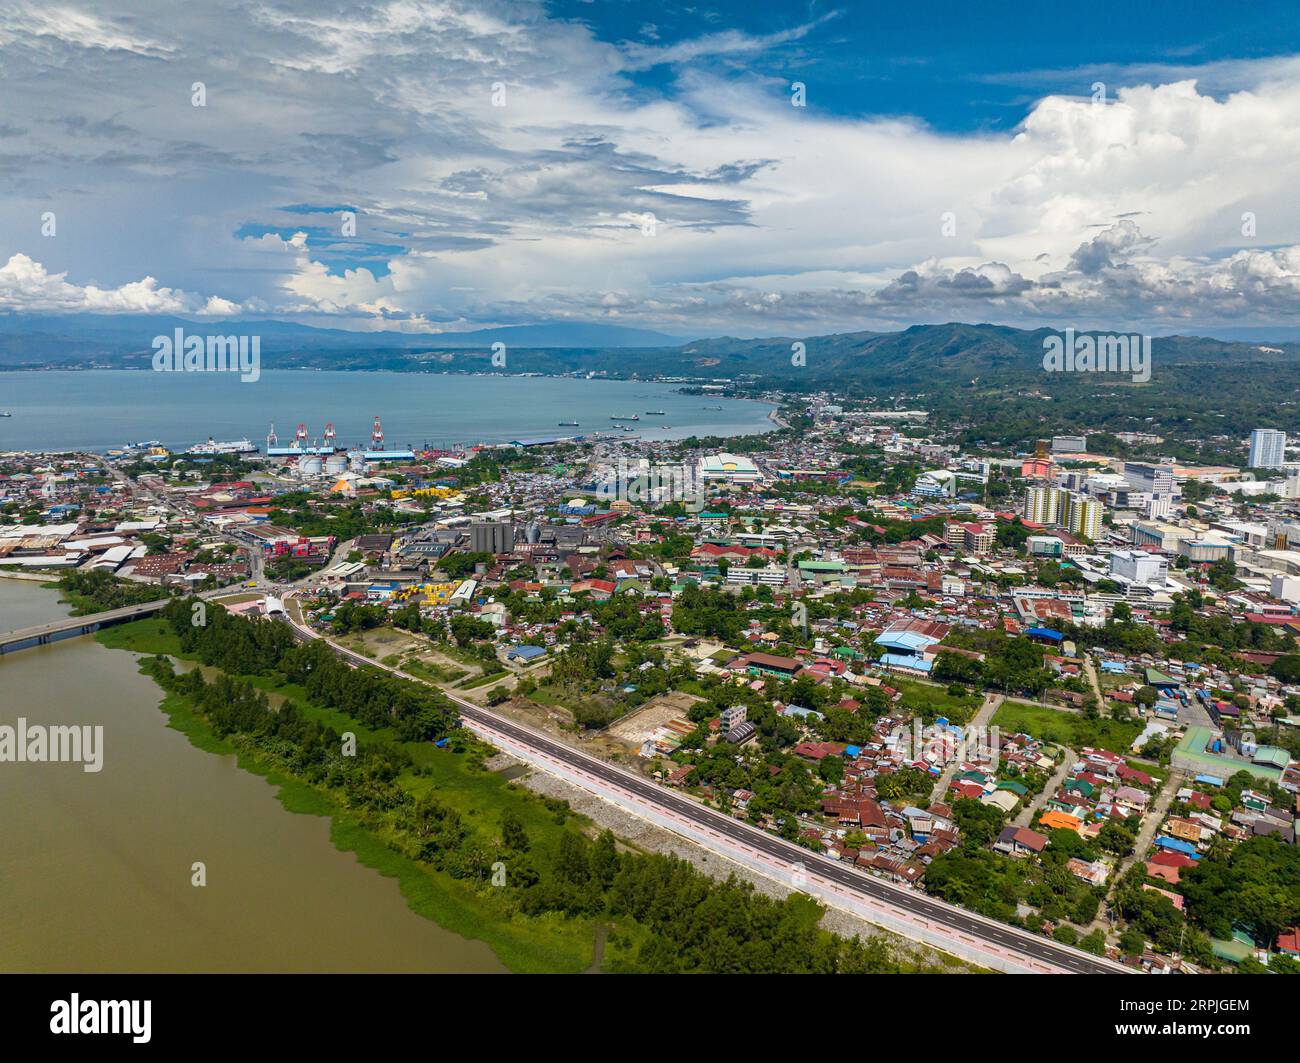 Coastline City with modern buildings and highway of Cagayan de Oro in Mindanao, Philippines. Stock Photo